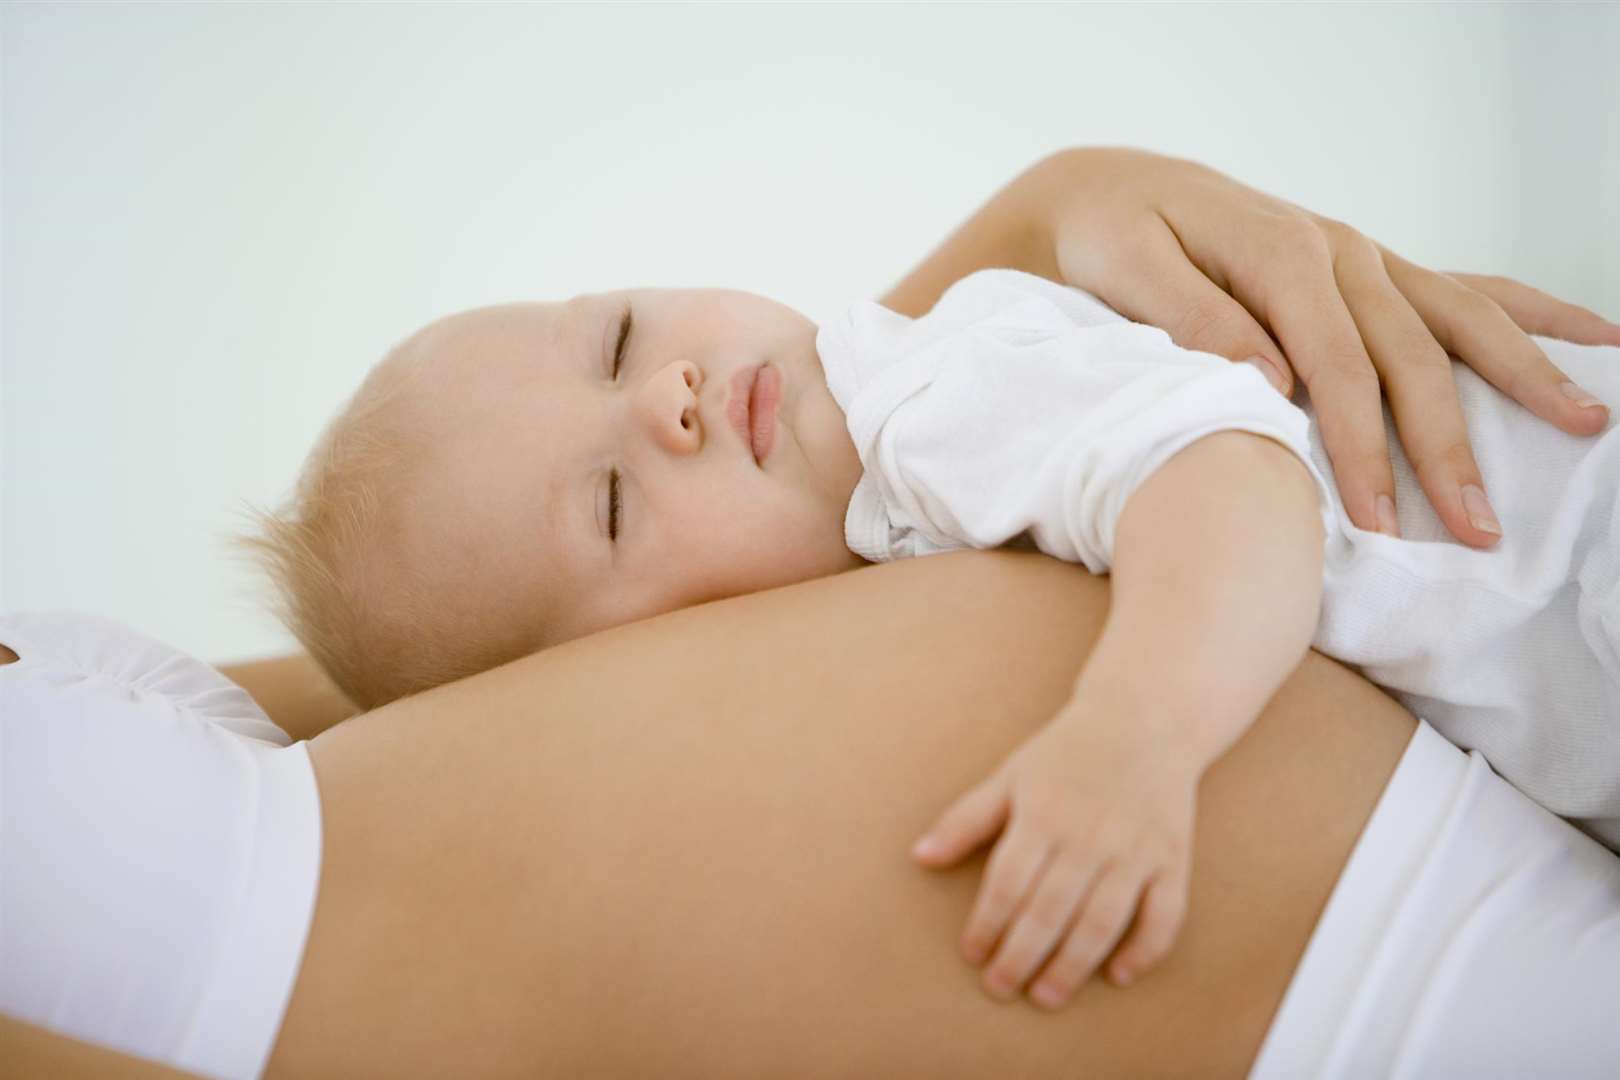 Baby sleeping on pregnant woman's stomachSlug: Pregnant TNCaption: Baby resting on expectant mums tummyContact: Thinkstock Image Library 0800 028 6268 or 0203 2272347. Email: uksales@thinkstock.comConditions of use: KMG useCopyright: Goodshot/ThinkstockCategory: Human interest (3861037)